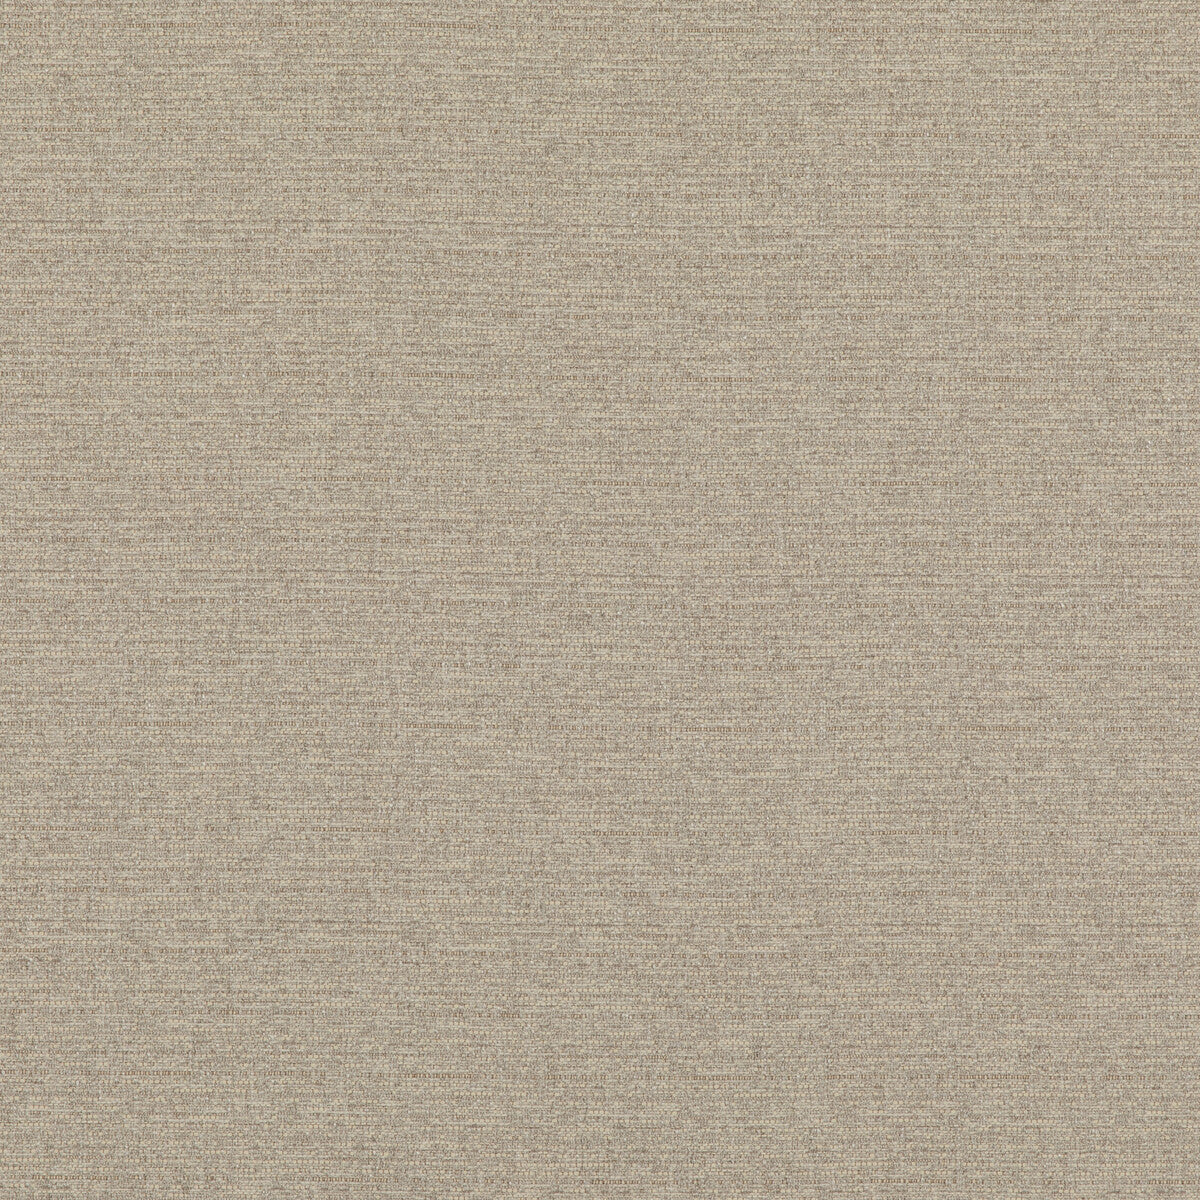 Bara fabric in ivory color - pattern ED85324.104.0 - by Threads in the Luxury Weaves II collection